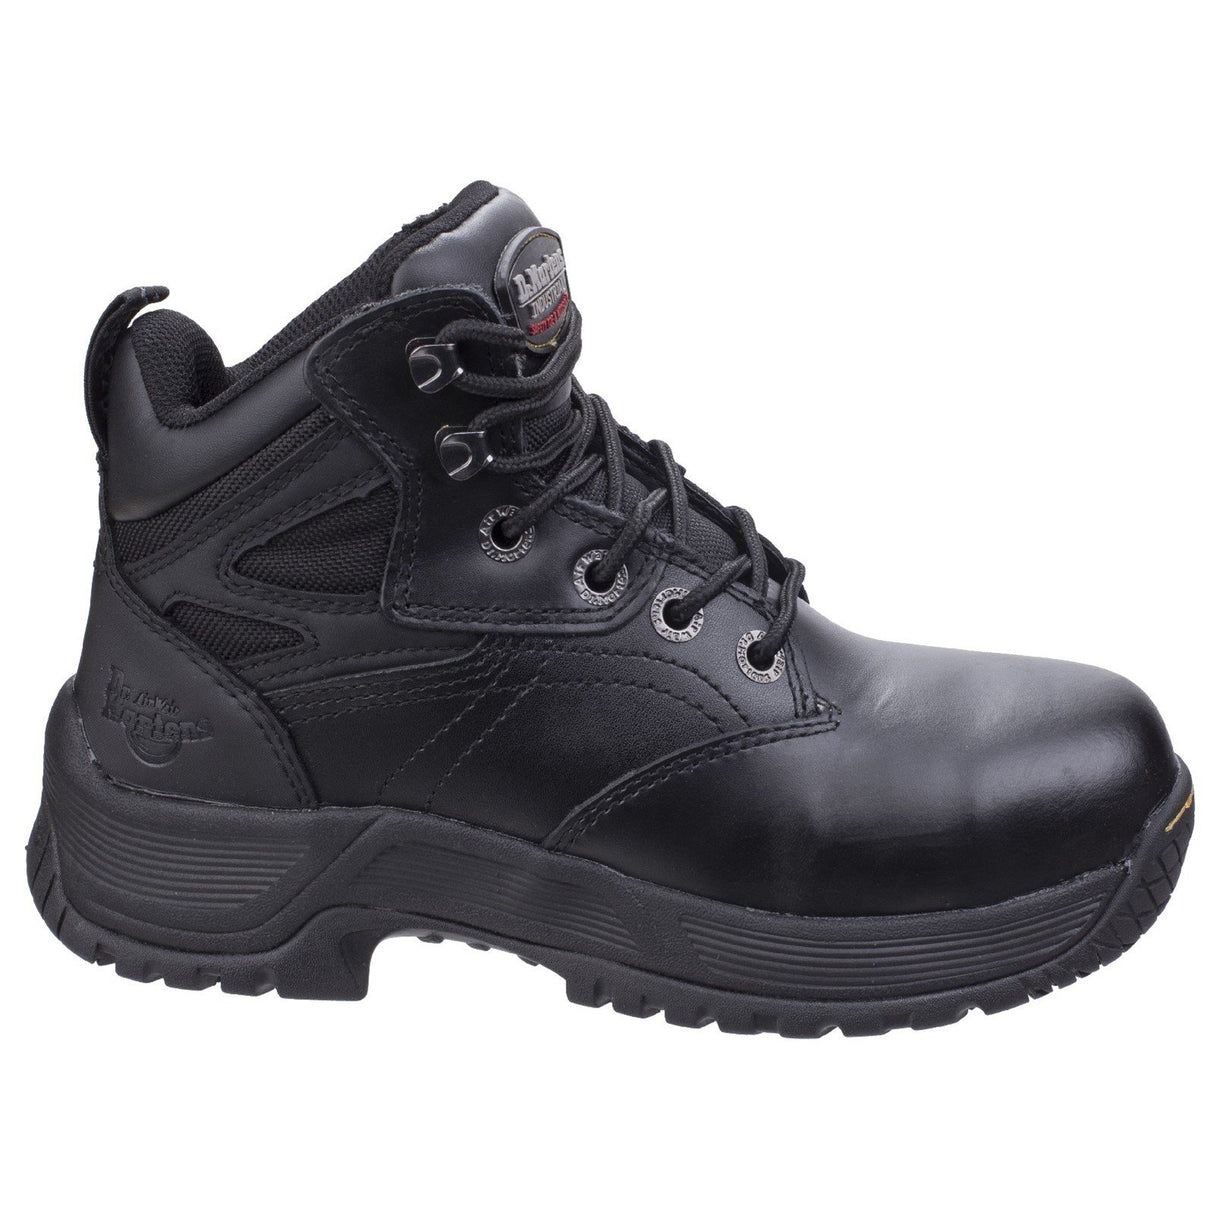 Dr Martens Torness Safety Boots